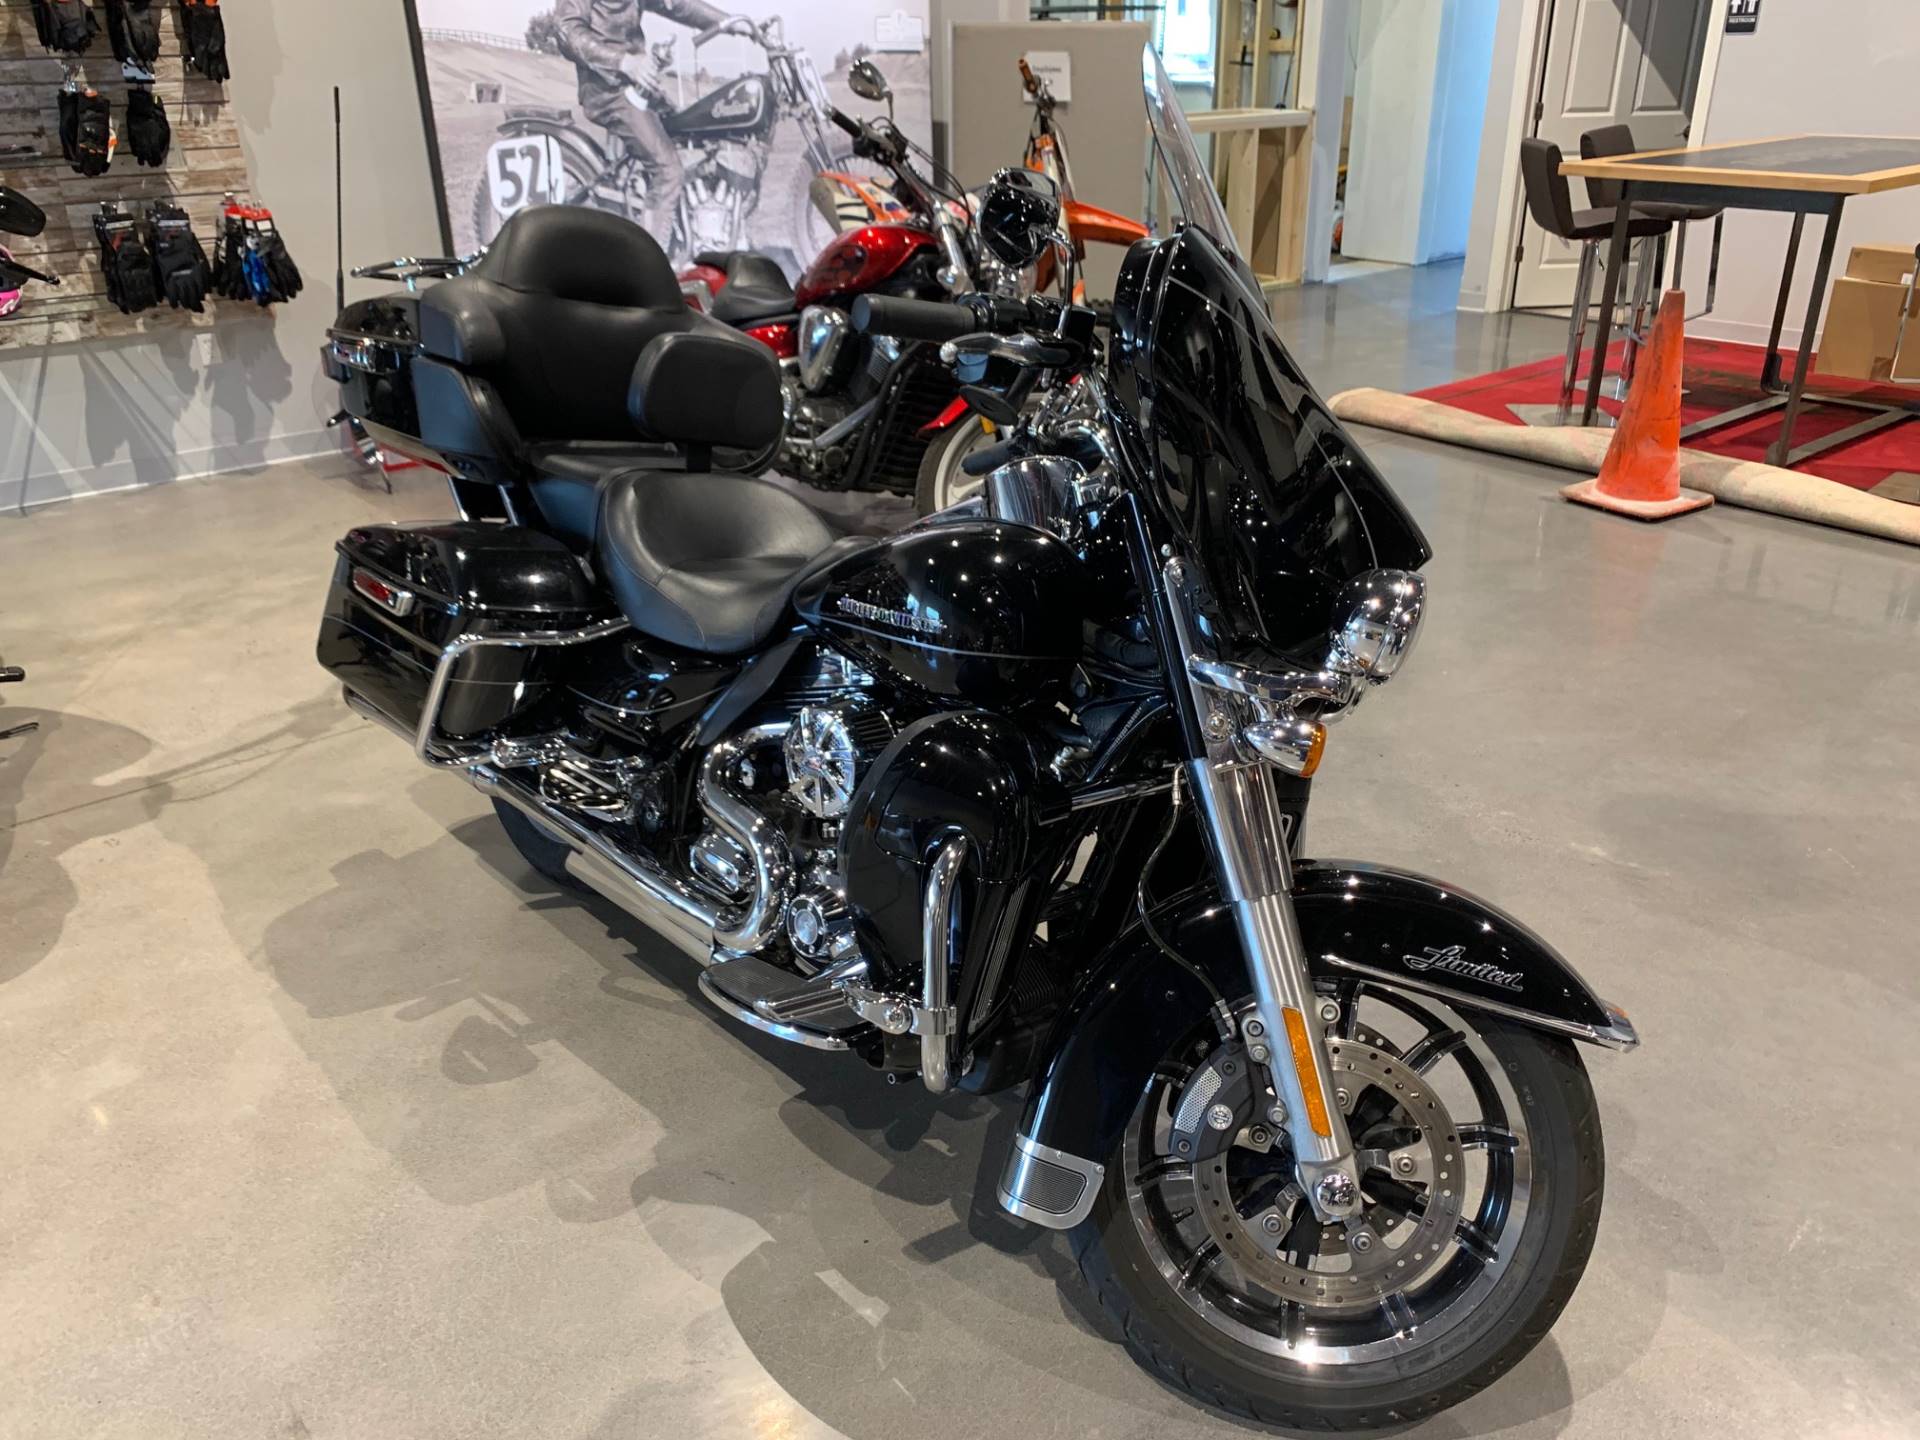 Used 2014 Harley Davidson Ultra Limited Motorcycles In Dansville Ny U66222 Vivid Black Peace Officer Special Edition